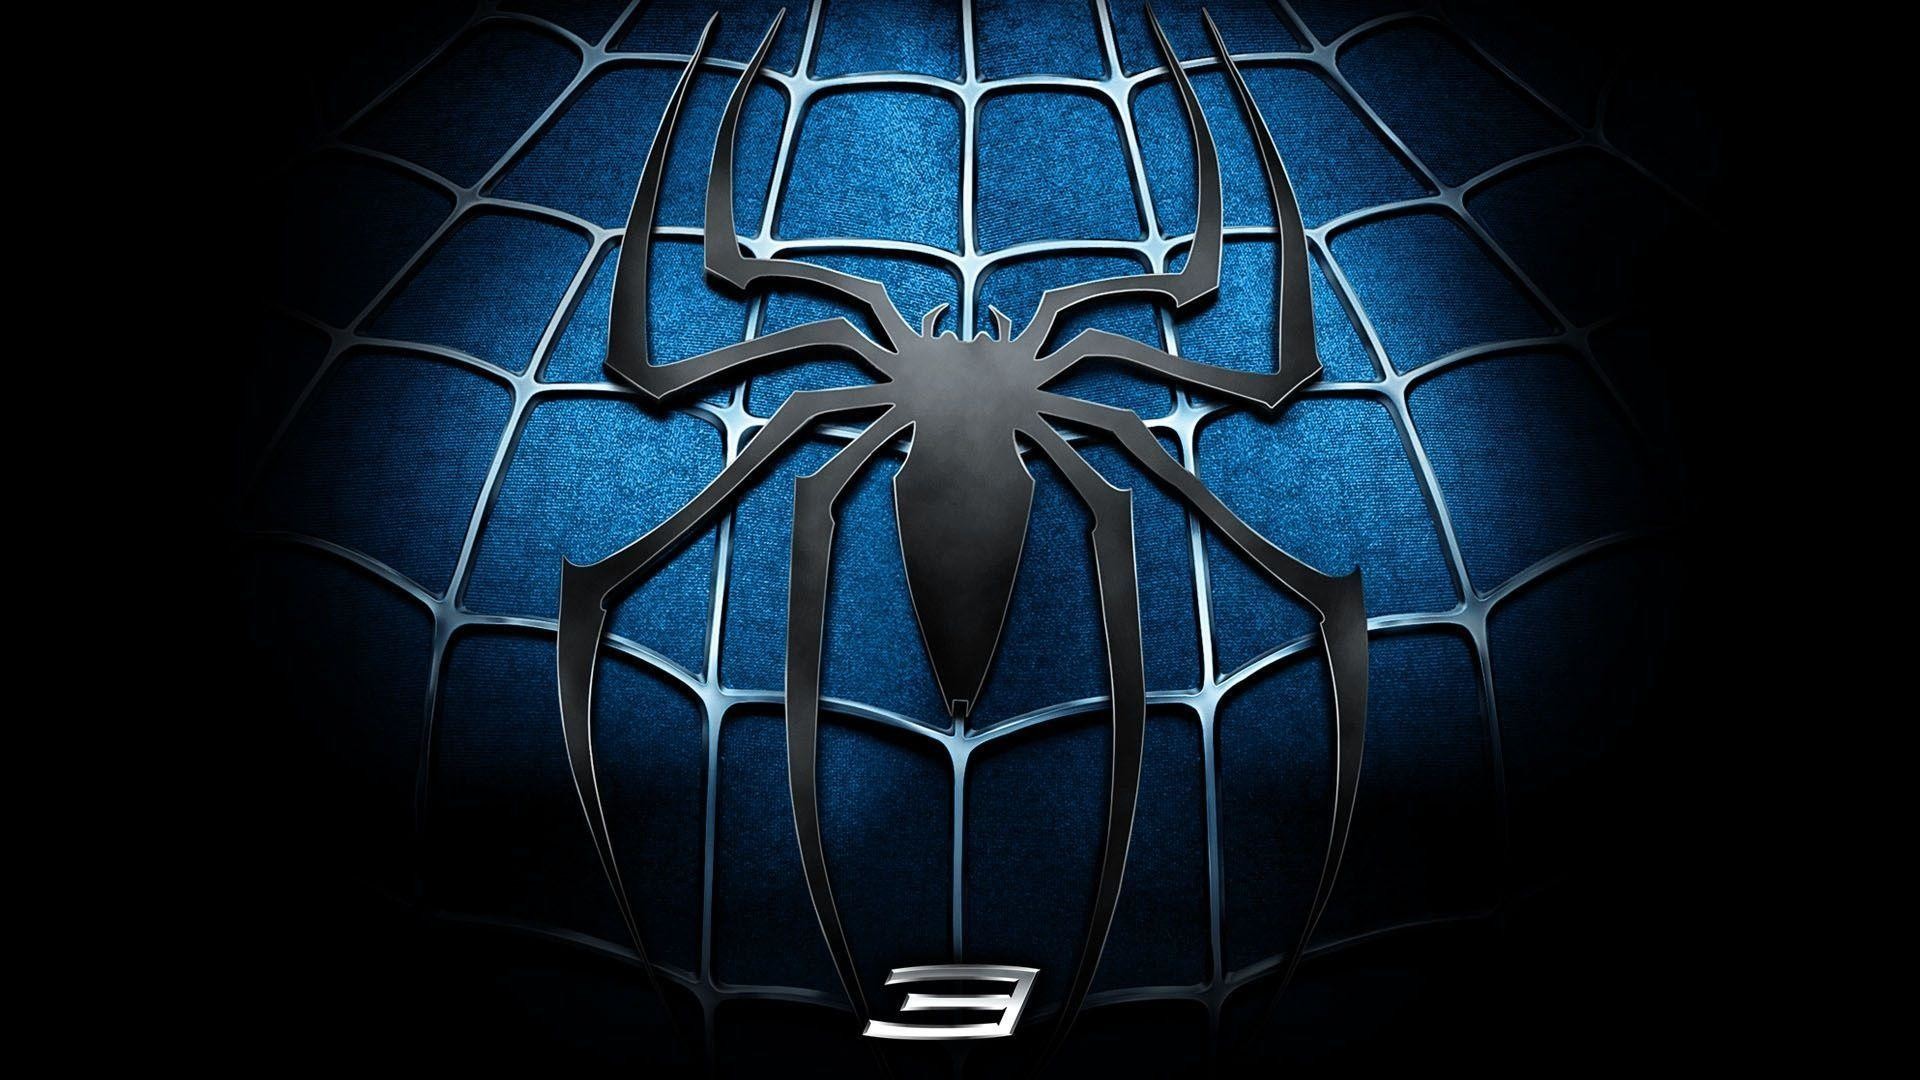 1920x1080 Wallpapers For > Spiderman 3 Wallpaper Hd 1080p